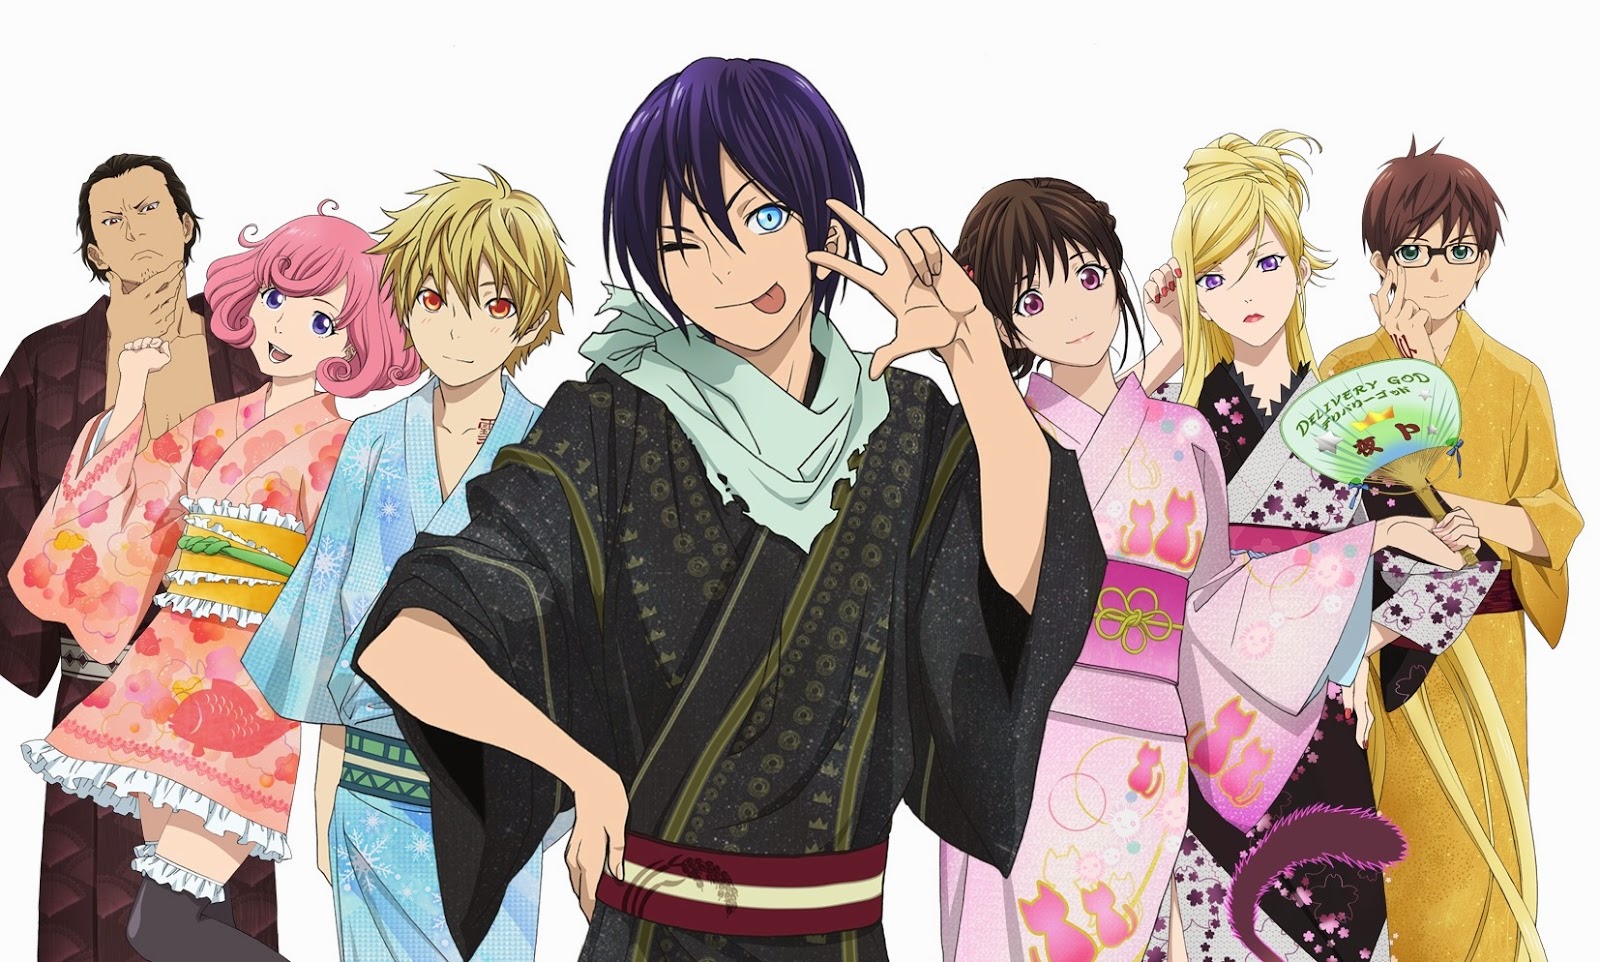 Anime Review] Noragami Aragoto – Corruption vs Loyalty: Which one